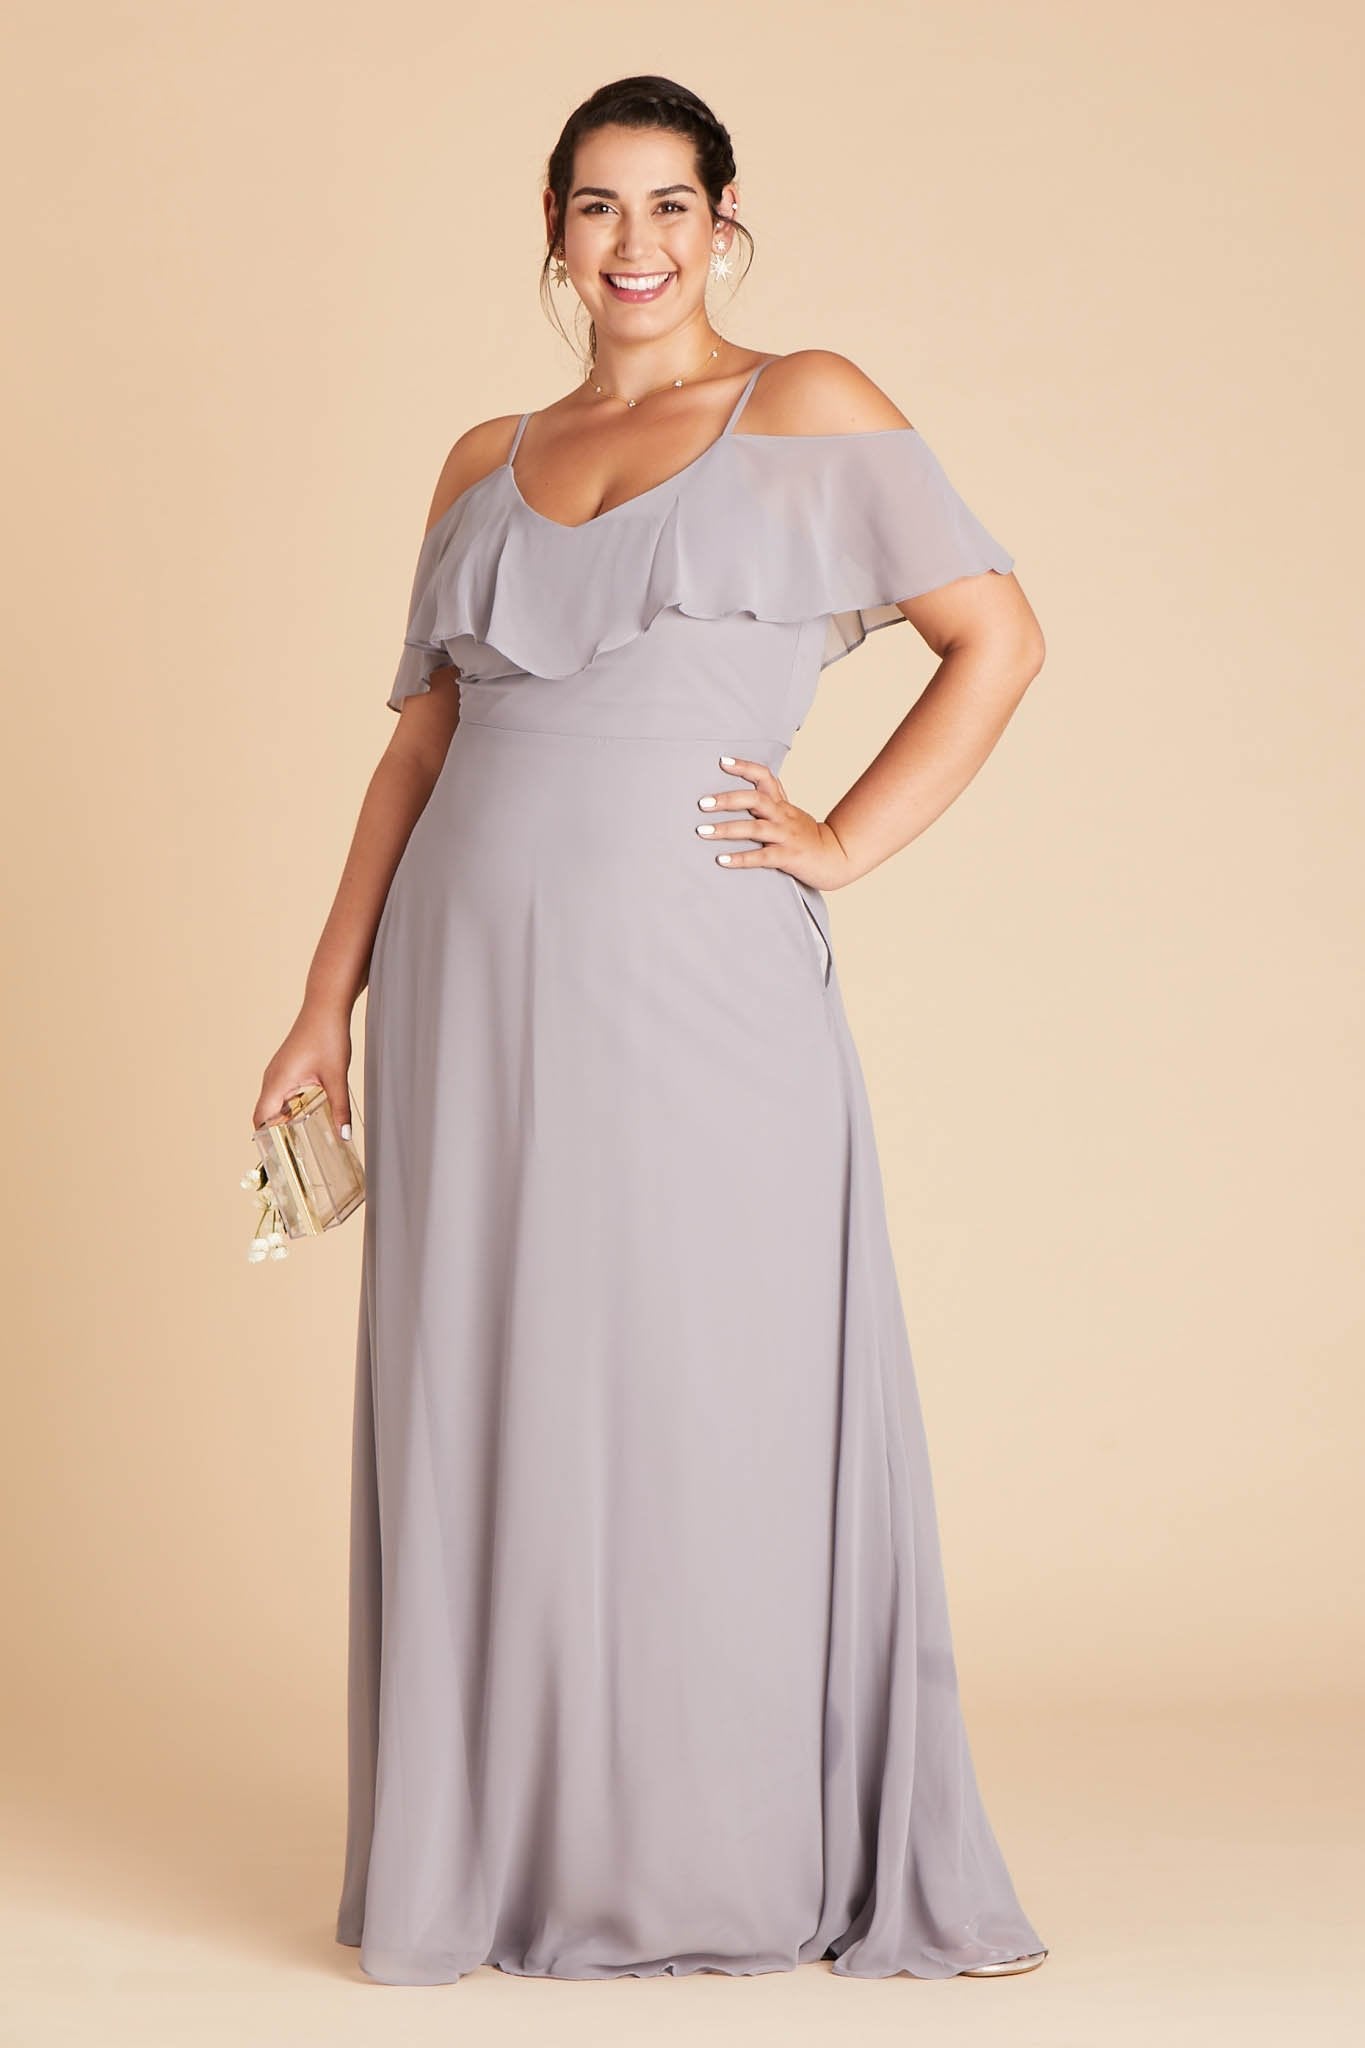 Jane convertible plus size bridesmaid dress in silver chiffon by Birdy Grey, front view